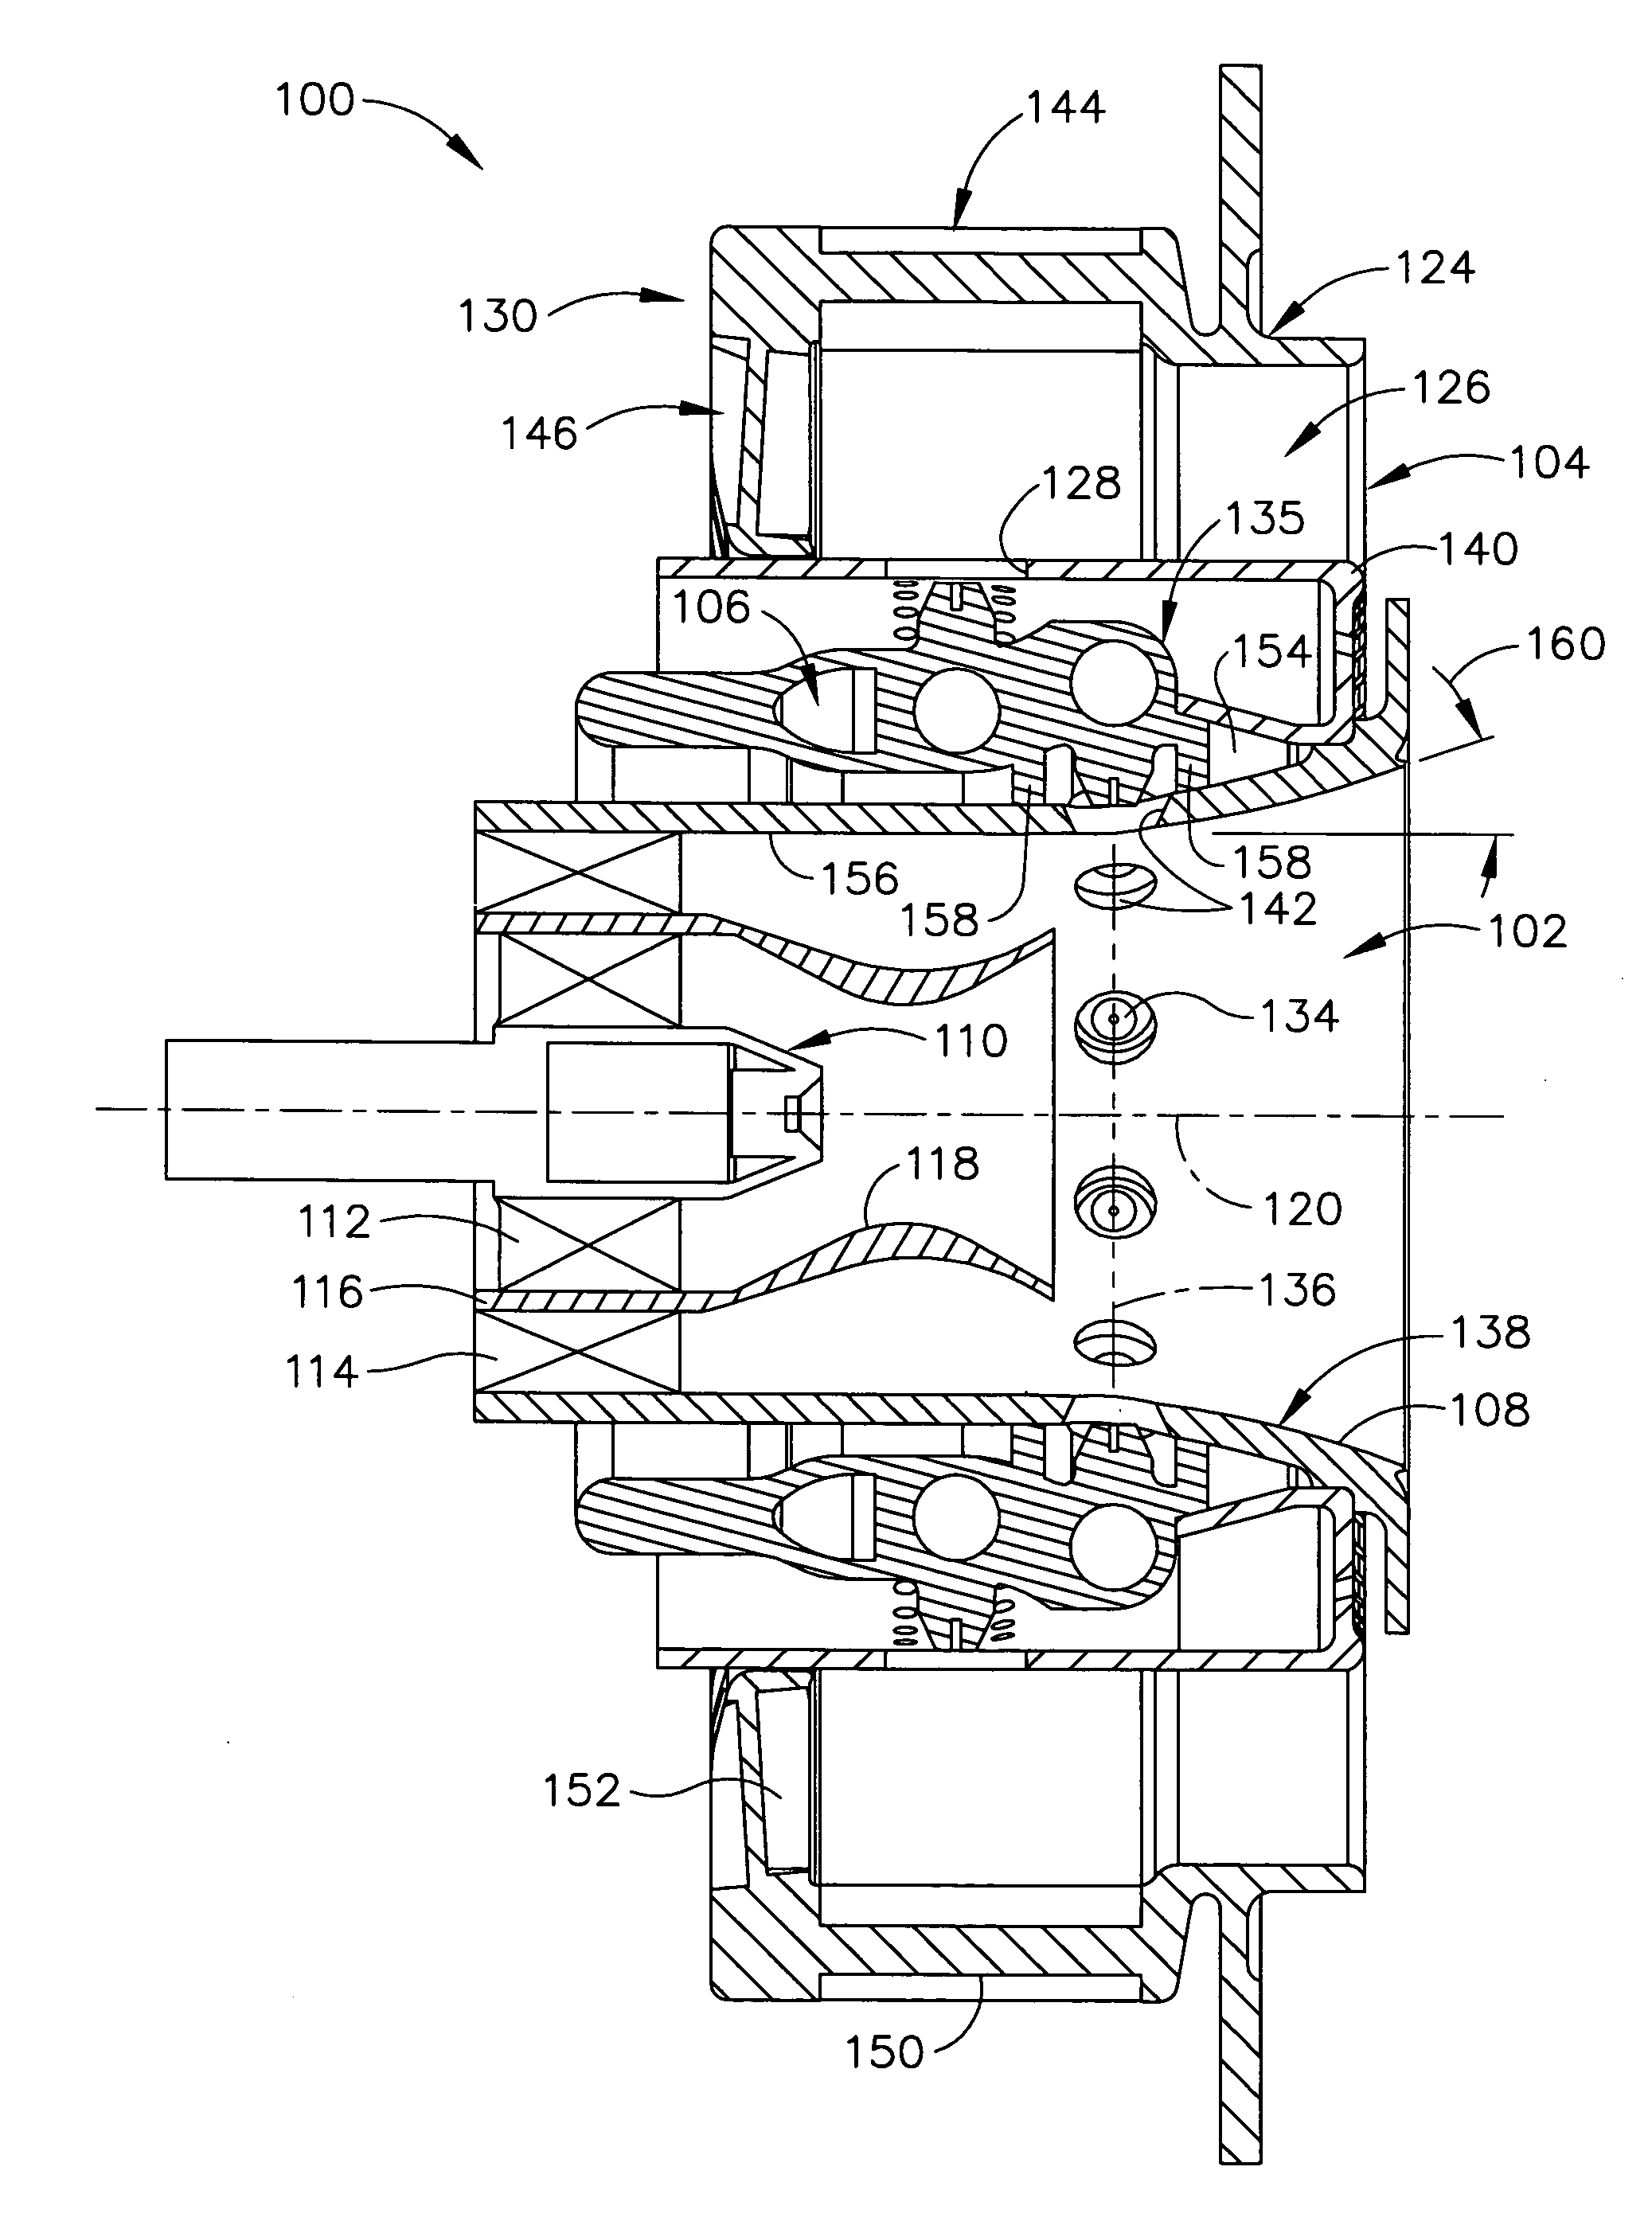 Pilot mixer for mixer assembly of a gas turbine engine combustor having a primary fuel injector and a plurality of secondary fuel injection ports